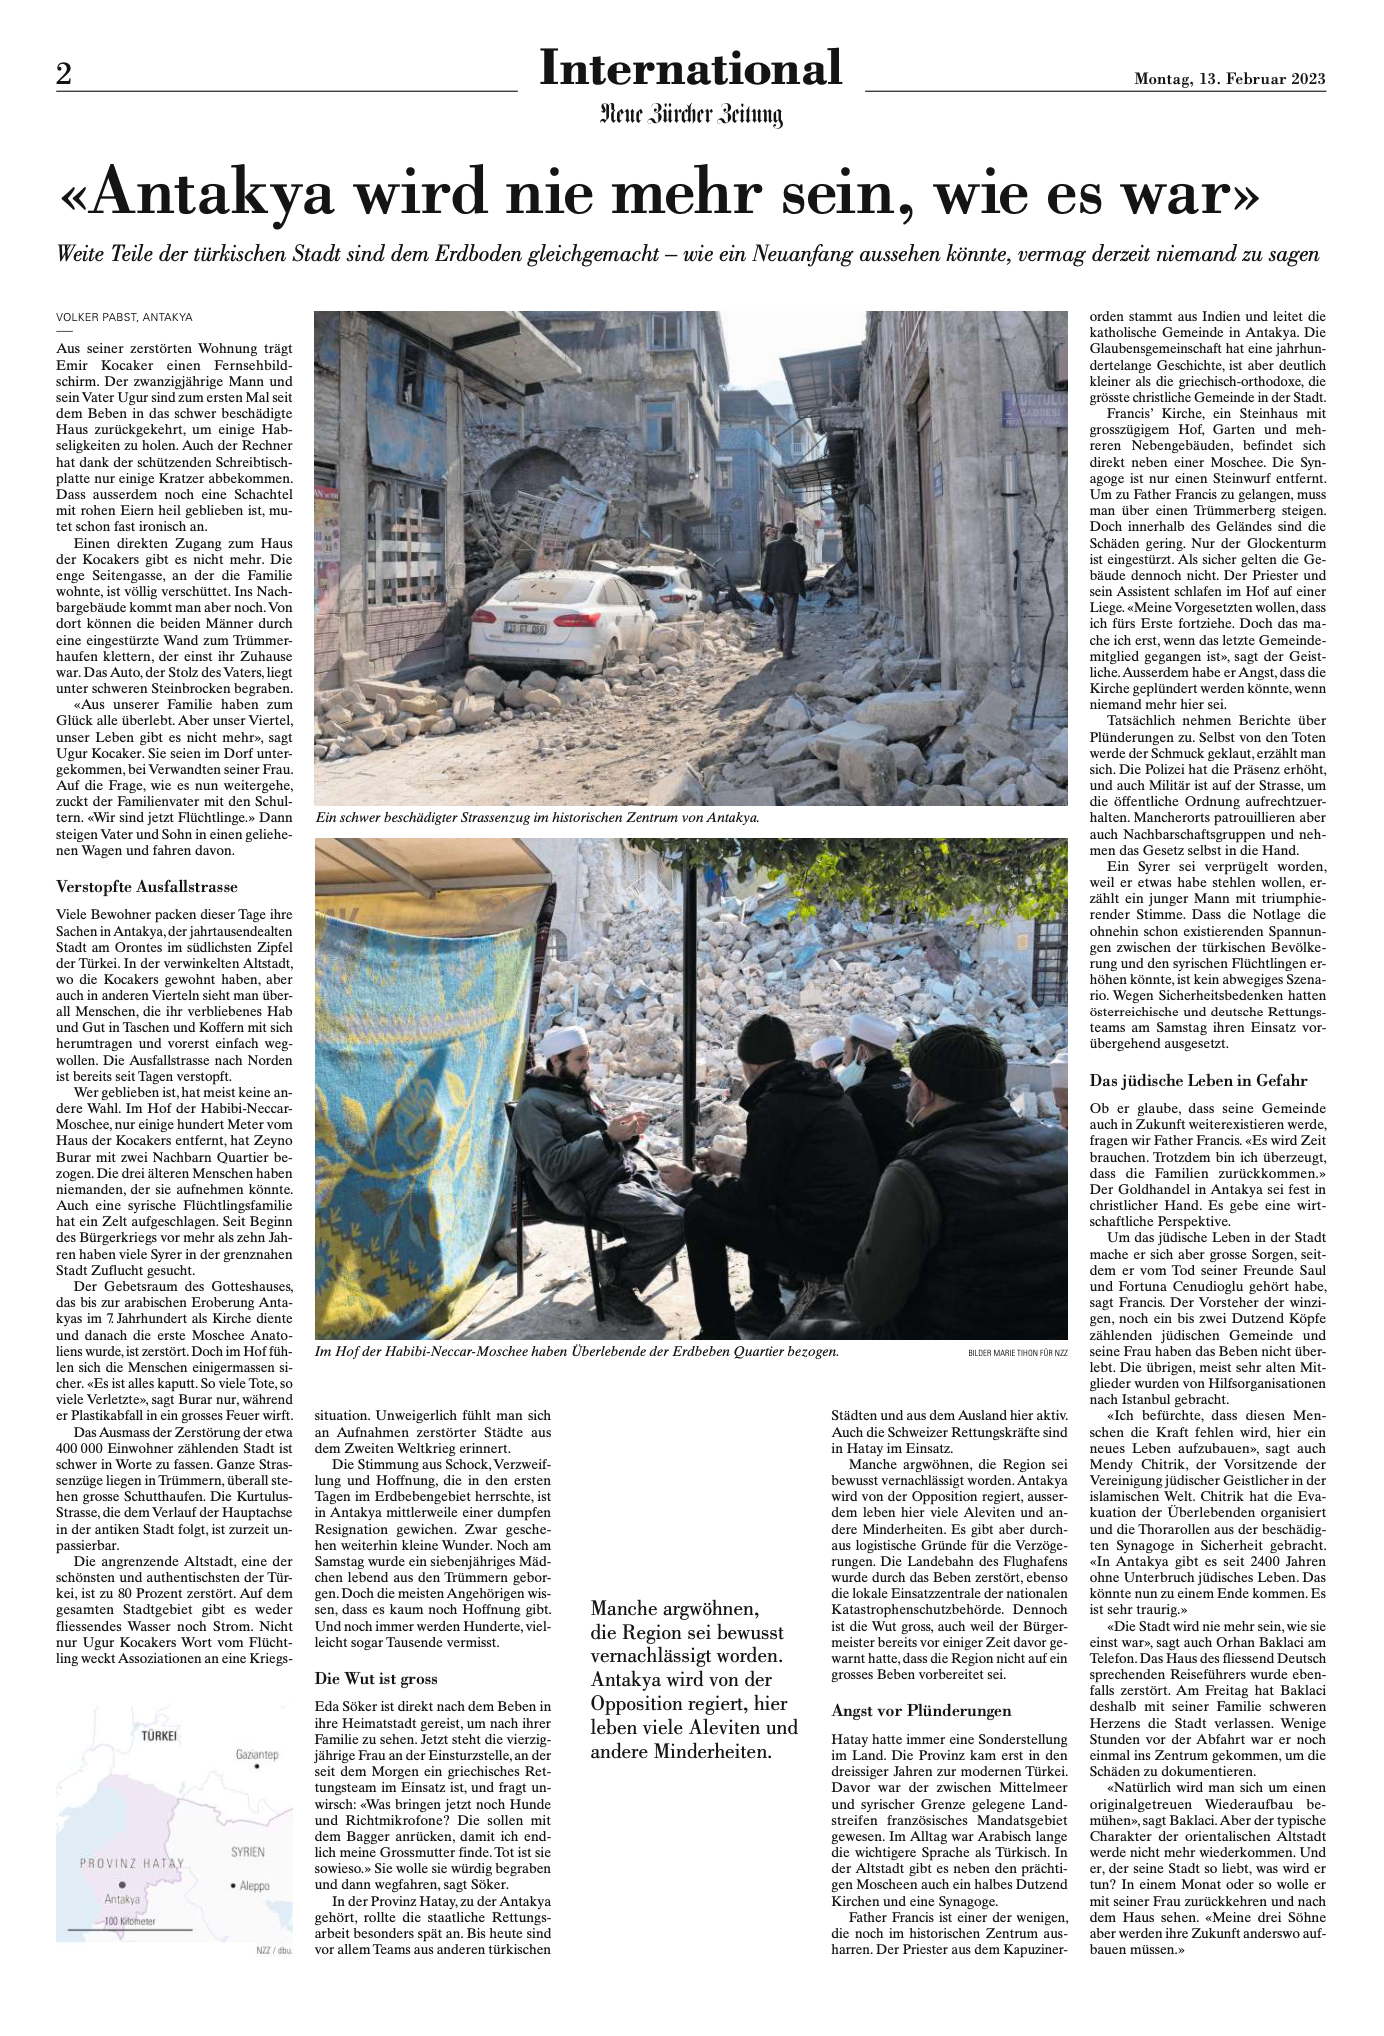 Image from Publications - Assignment for NZZ